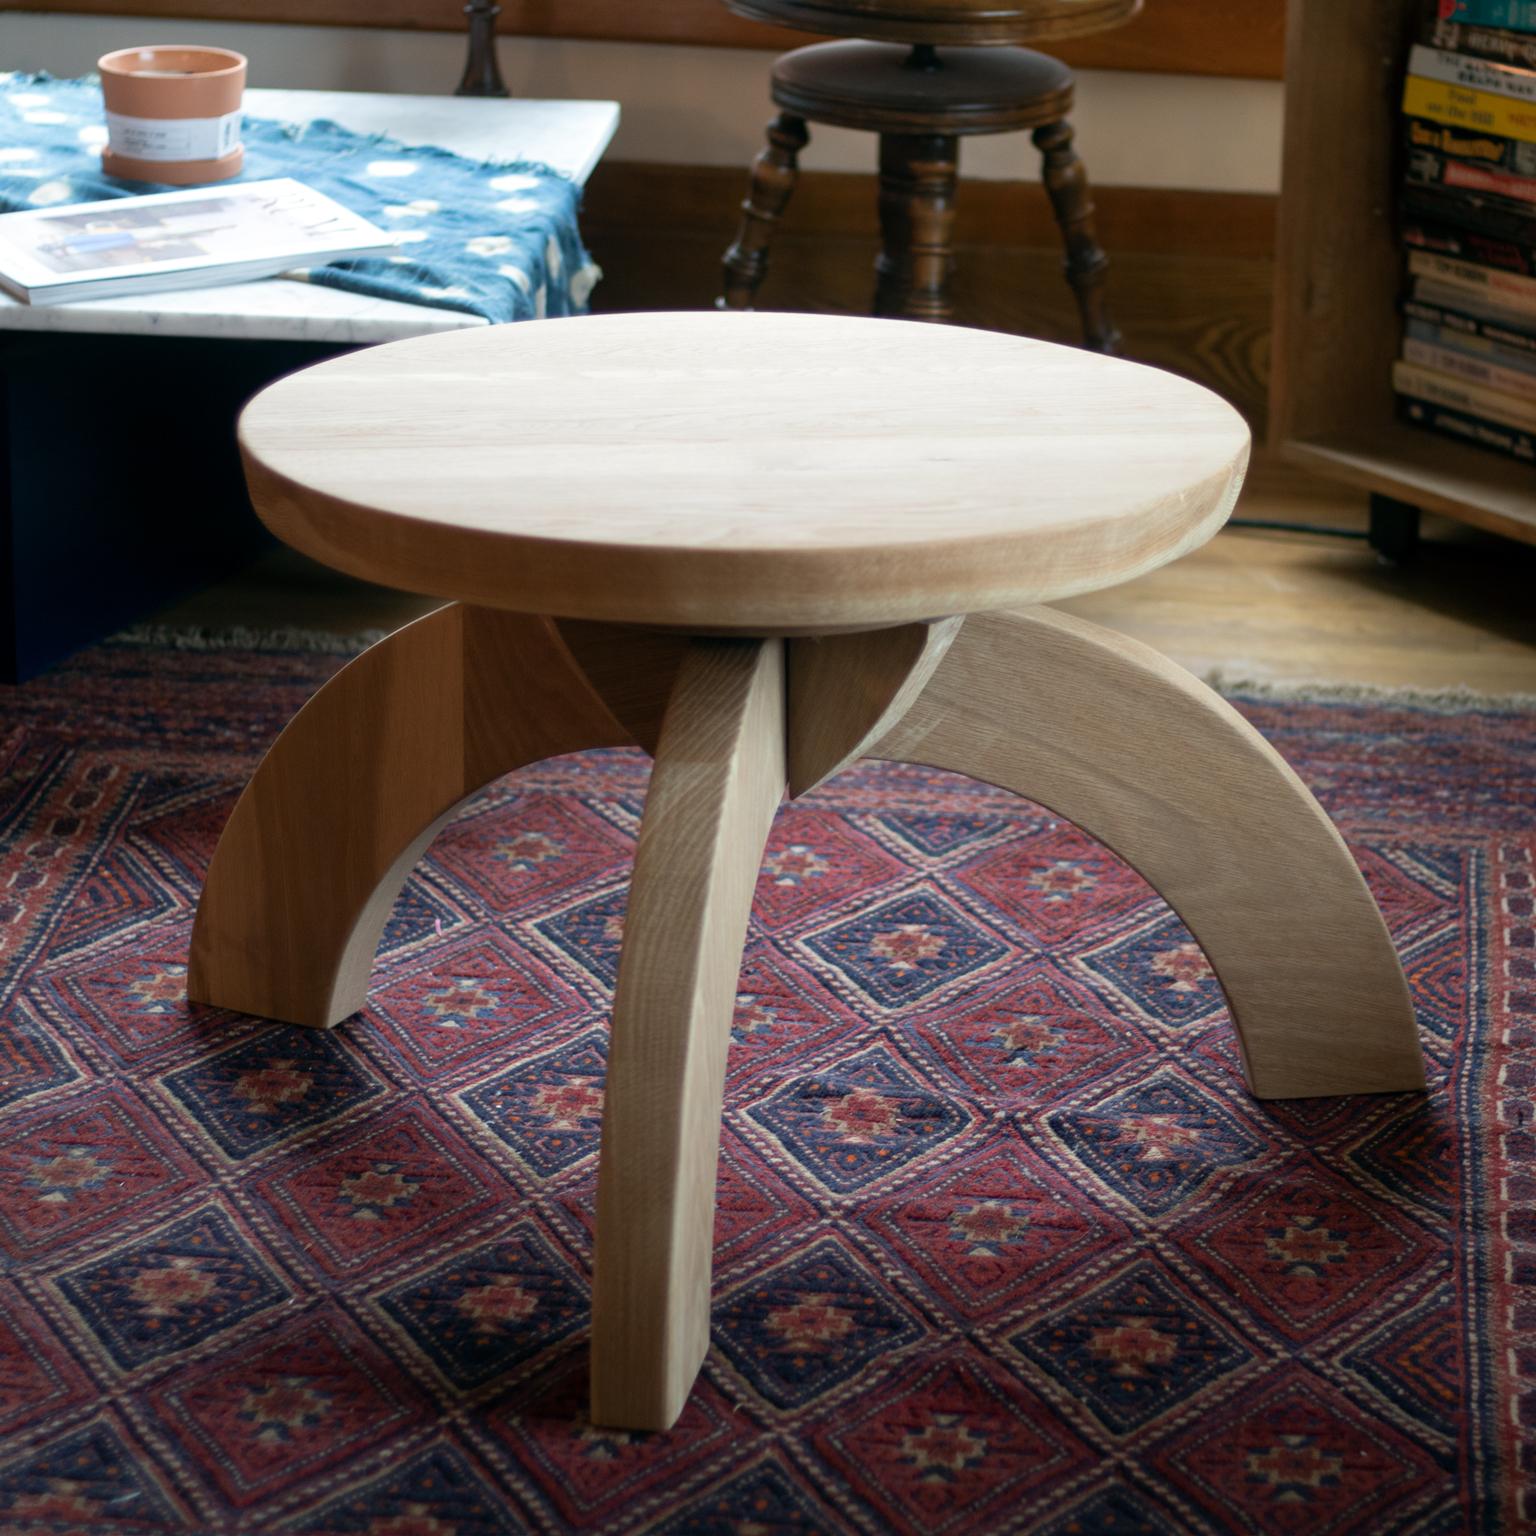 The Arroyo Seco side table is constructed of solid 1 - 3/4